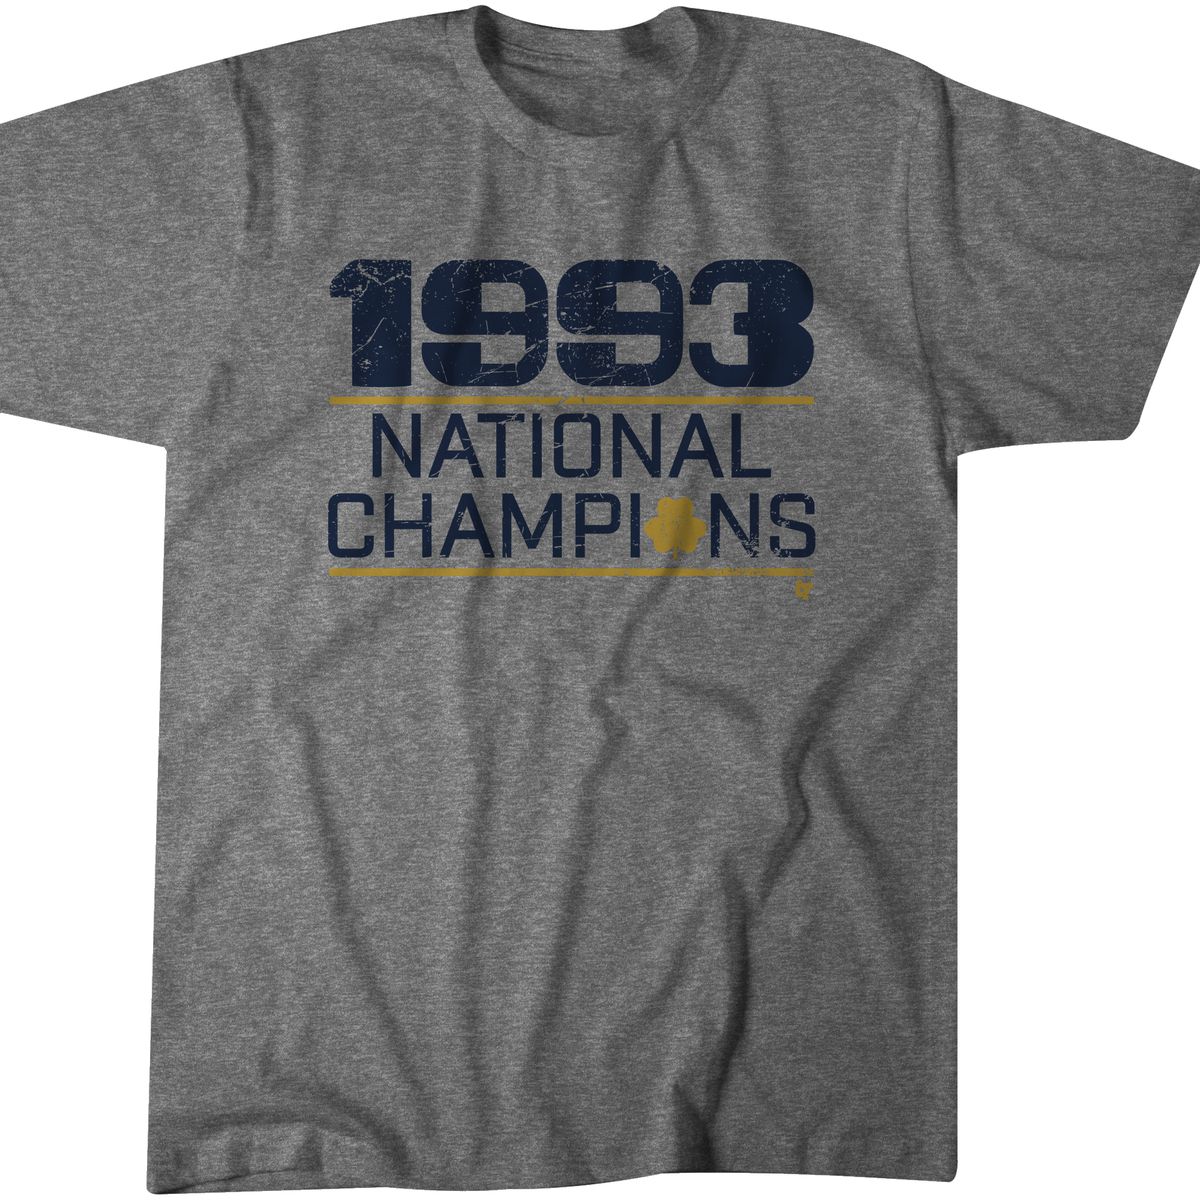 Black Friday Sale Notre Dame 1993 National Champions Hoodie And More One Foot Down